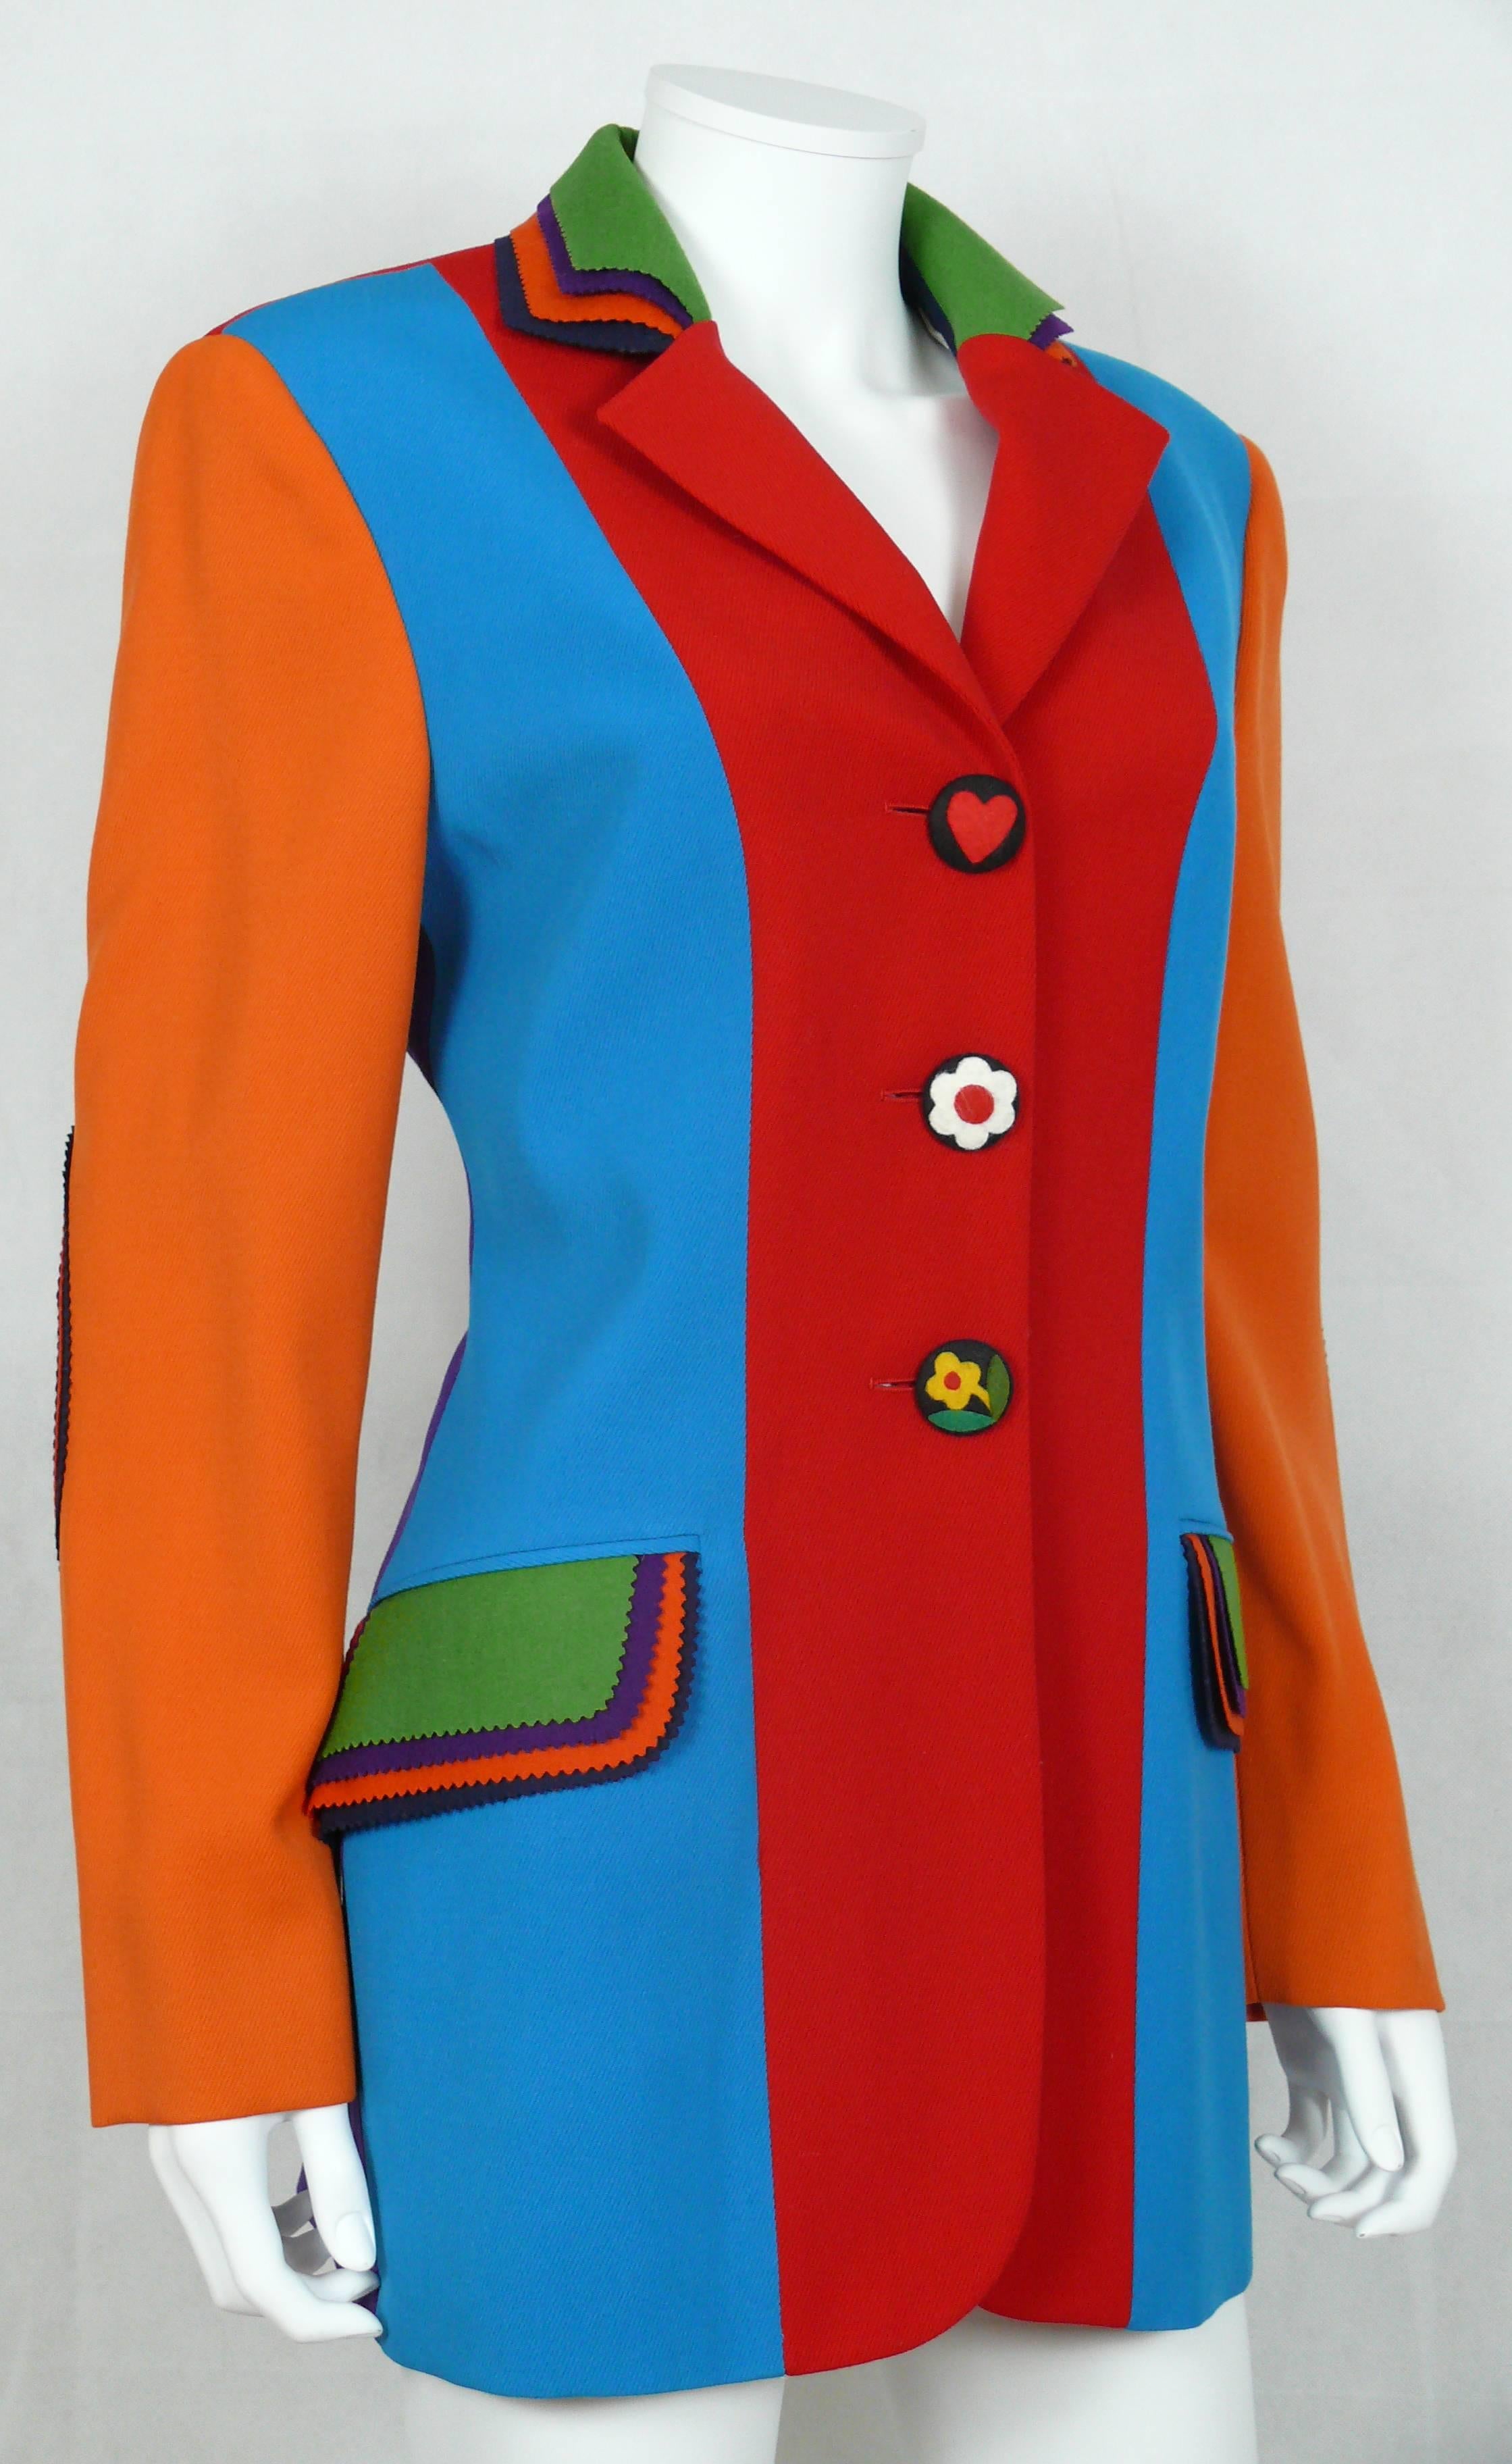 MOSCHINO vintage color blocked wool jacket.

Front floral and heart felter buttons.
Multicolored felter side pockets and collar.

Fitted cut.

Fully lined.

Label reads CHEAP AND CHIC by MOSCHINO Made in Italy.

Marked Size : I 44 / D 40 / F 40 / GB